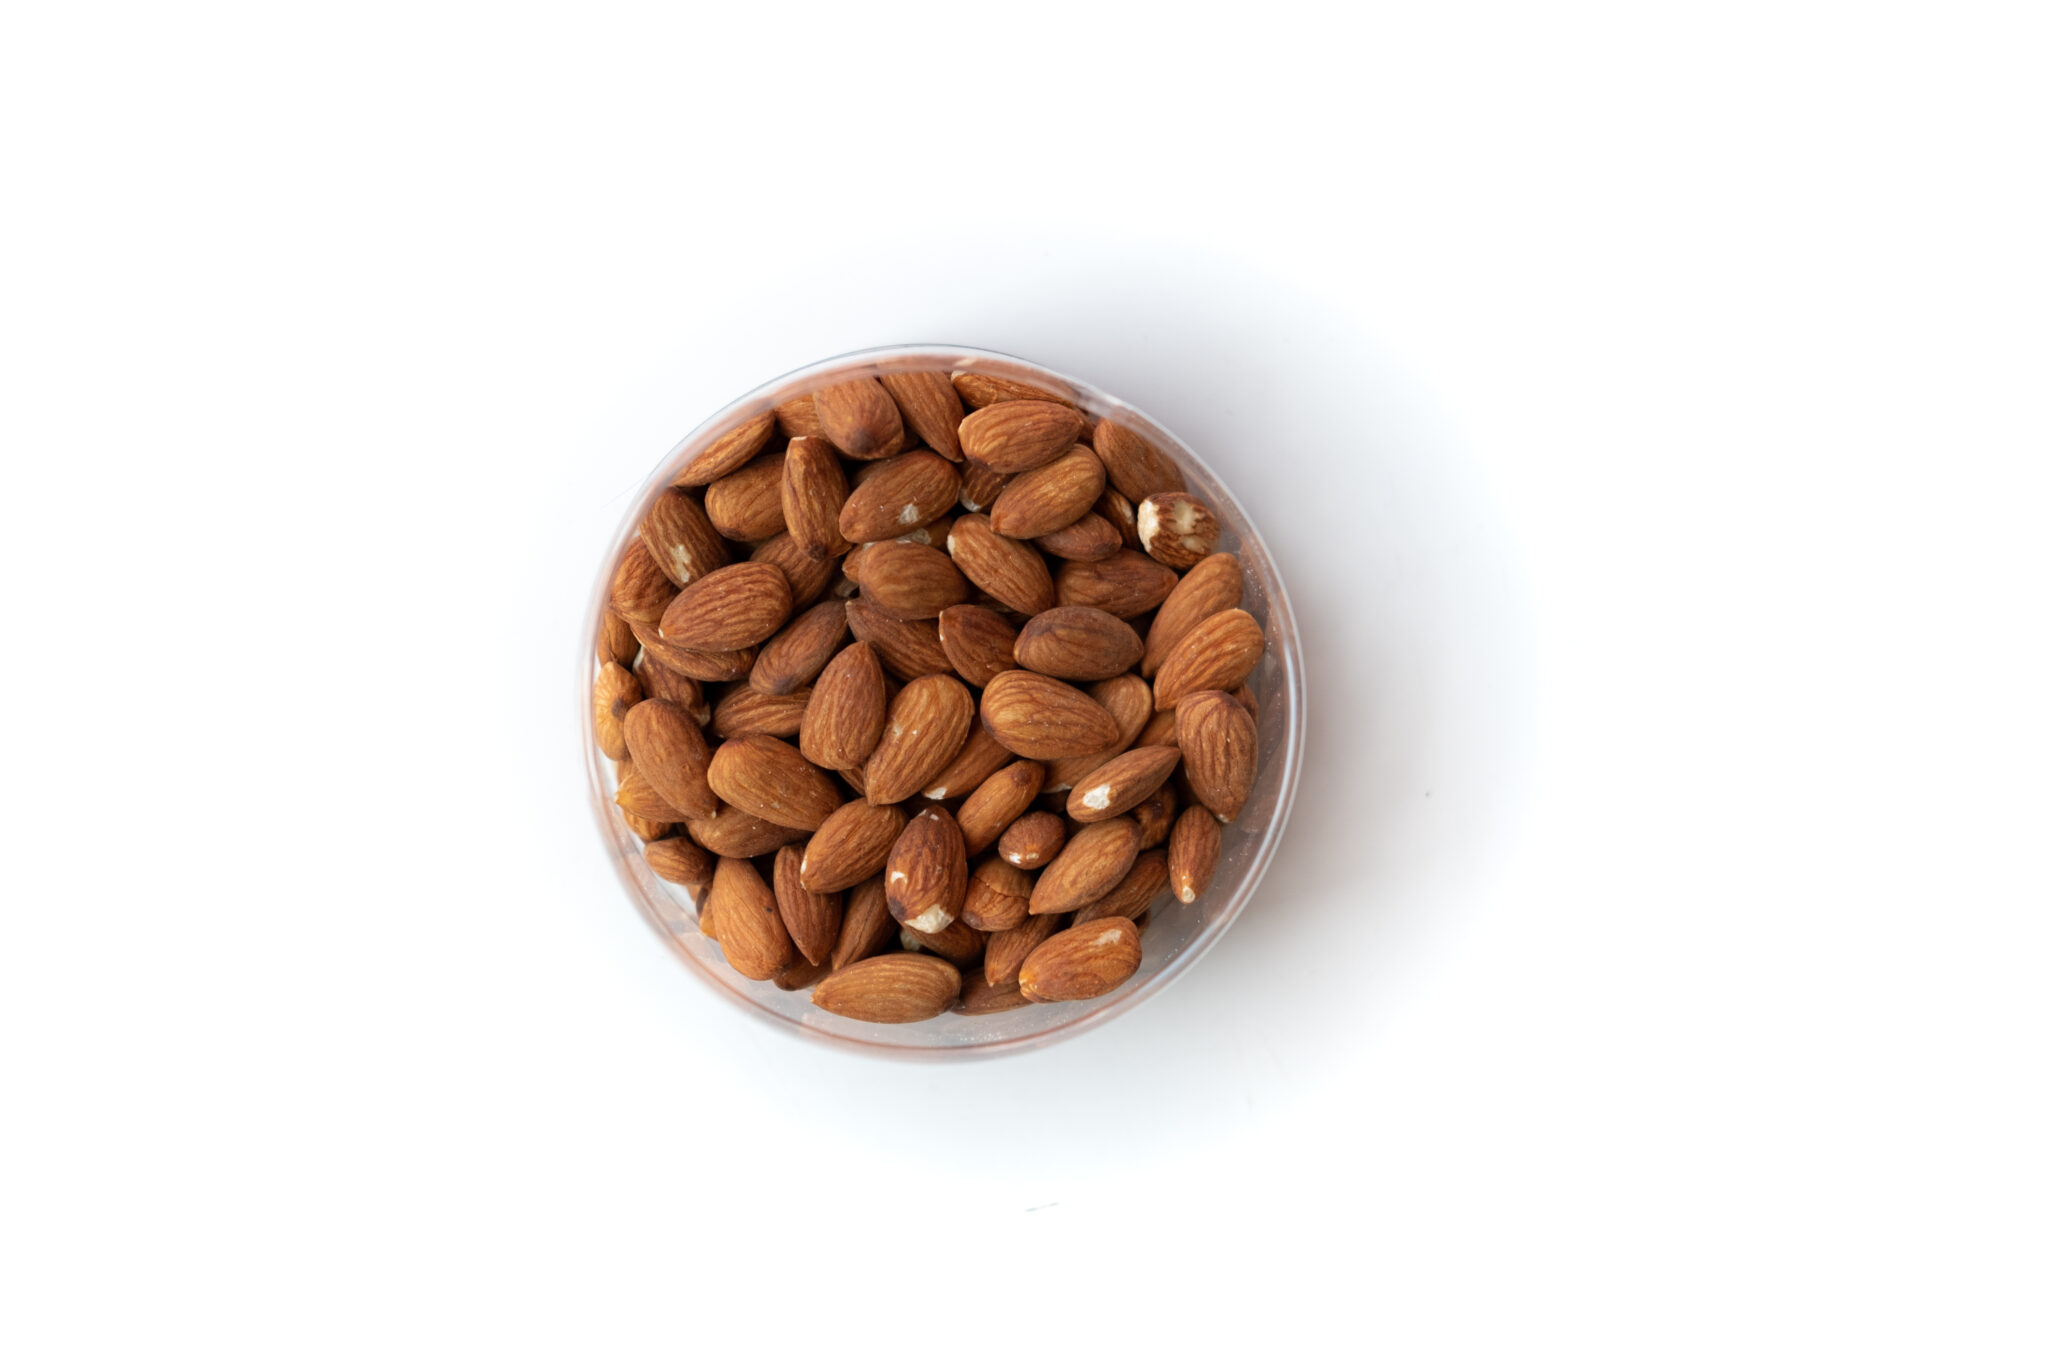 Organic almonds products